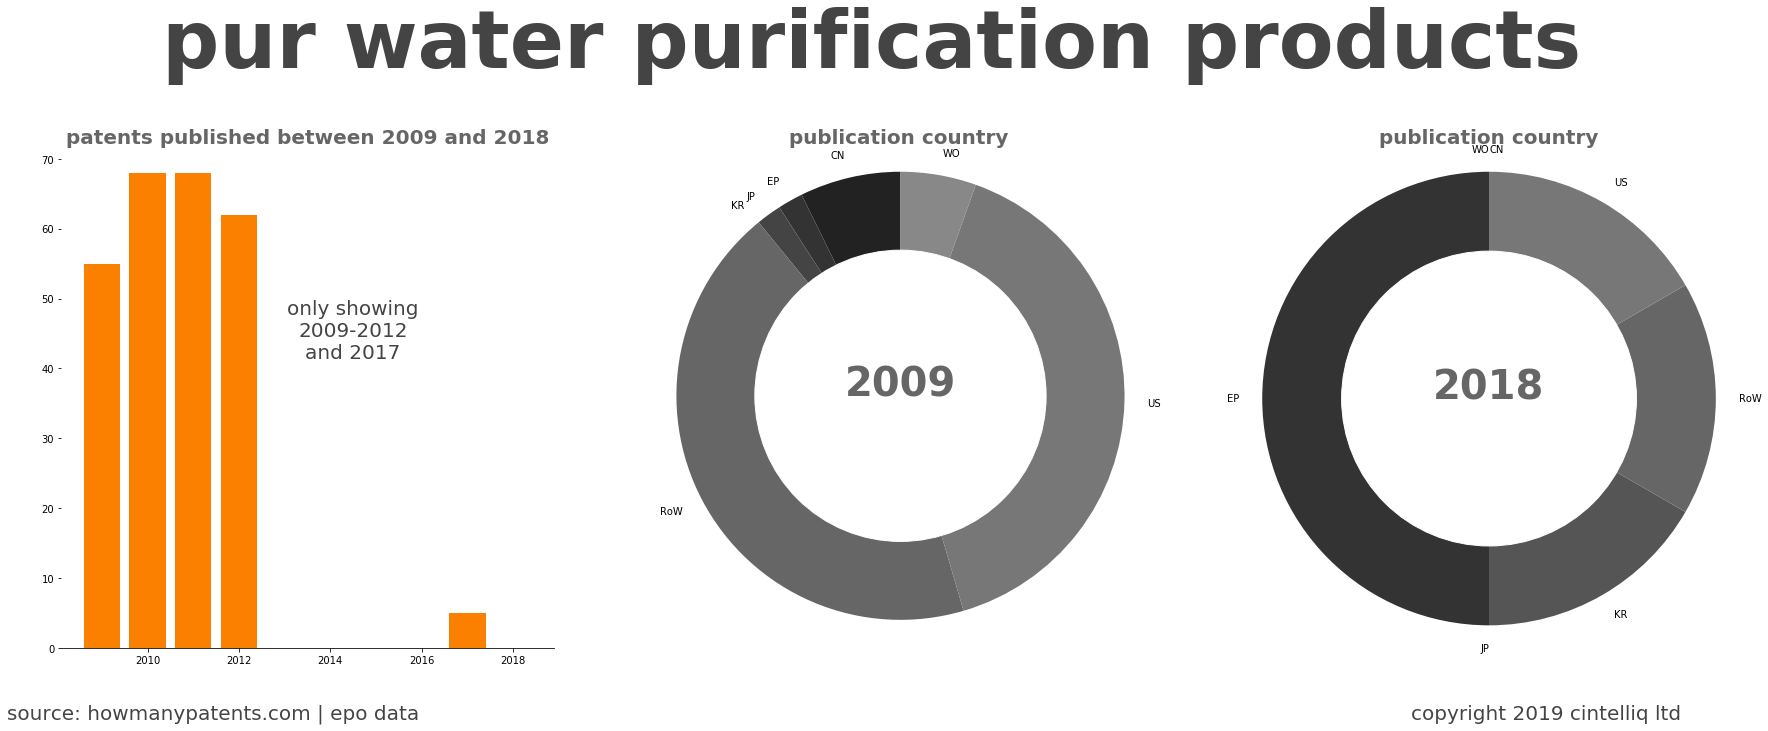 summary of patents for Pur Water Purification Products